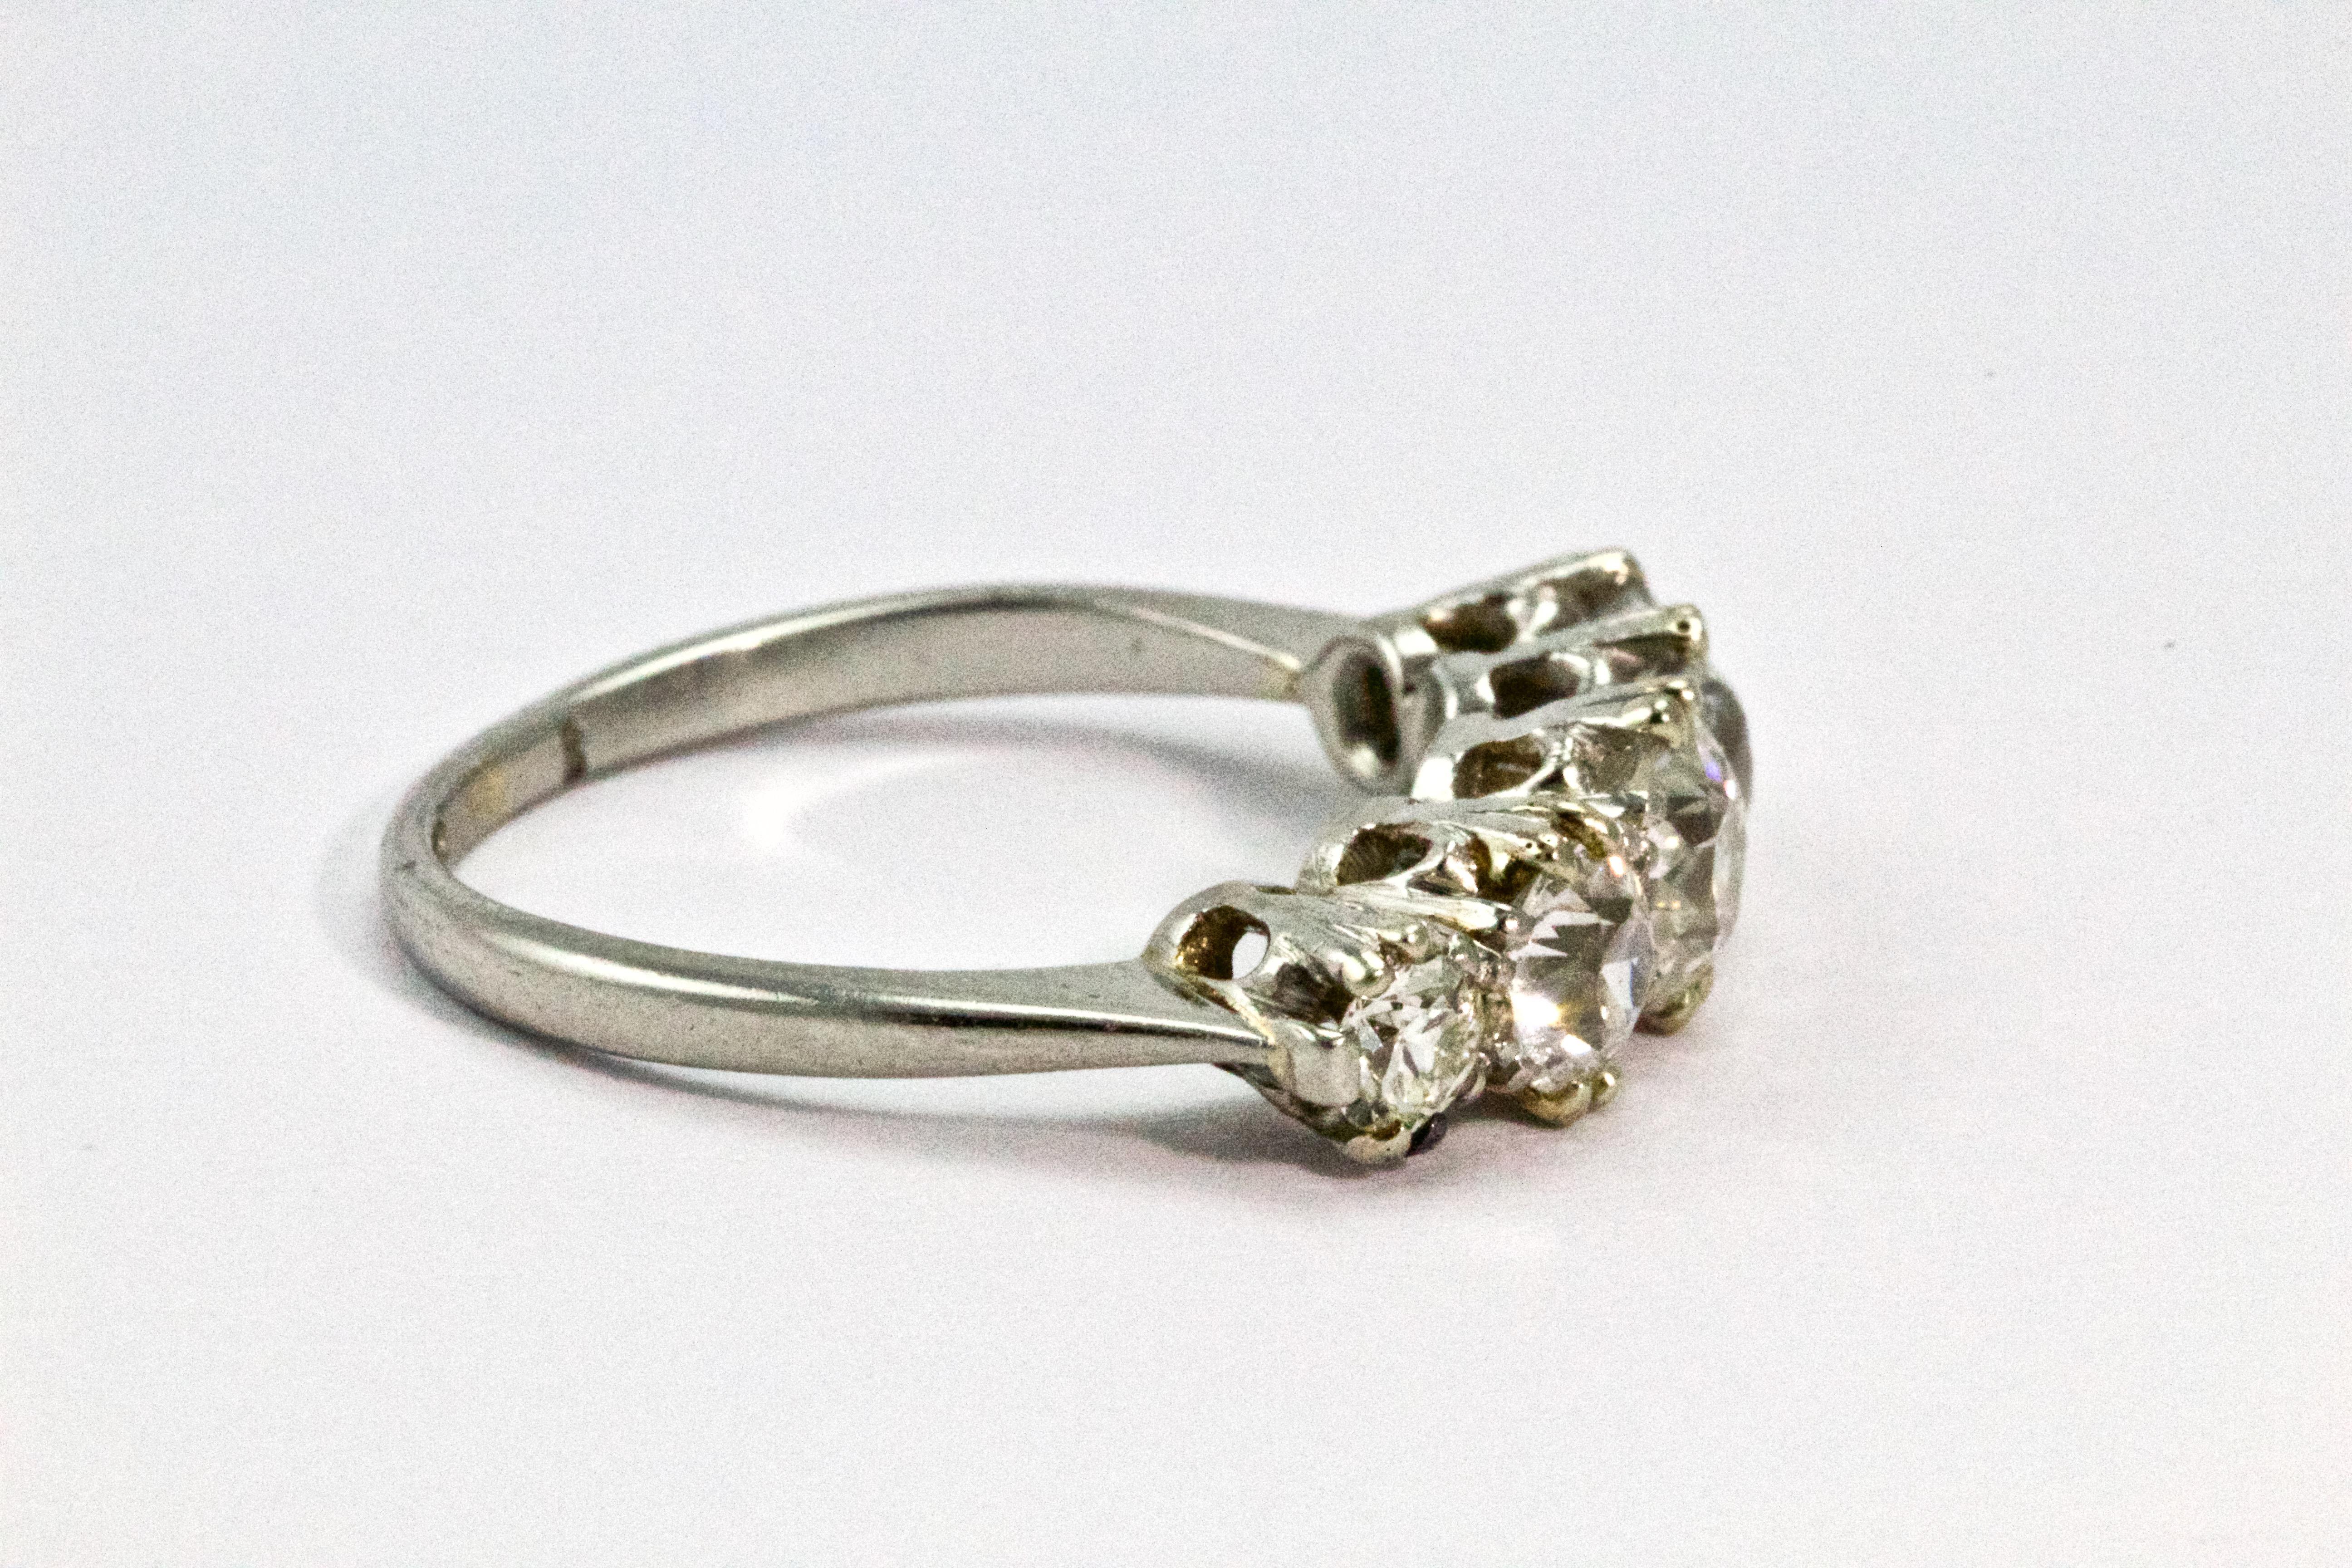 This antique Edwardian diamond and platinum ring was handcrafted in England around 1910. This glimmering ring features five Old European cut diamonds weighing certified 1.6 carats, H/I colour and VS1 clarity. These diamonds are graduated, lined in a